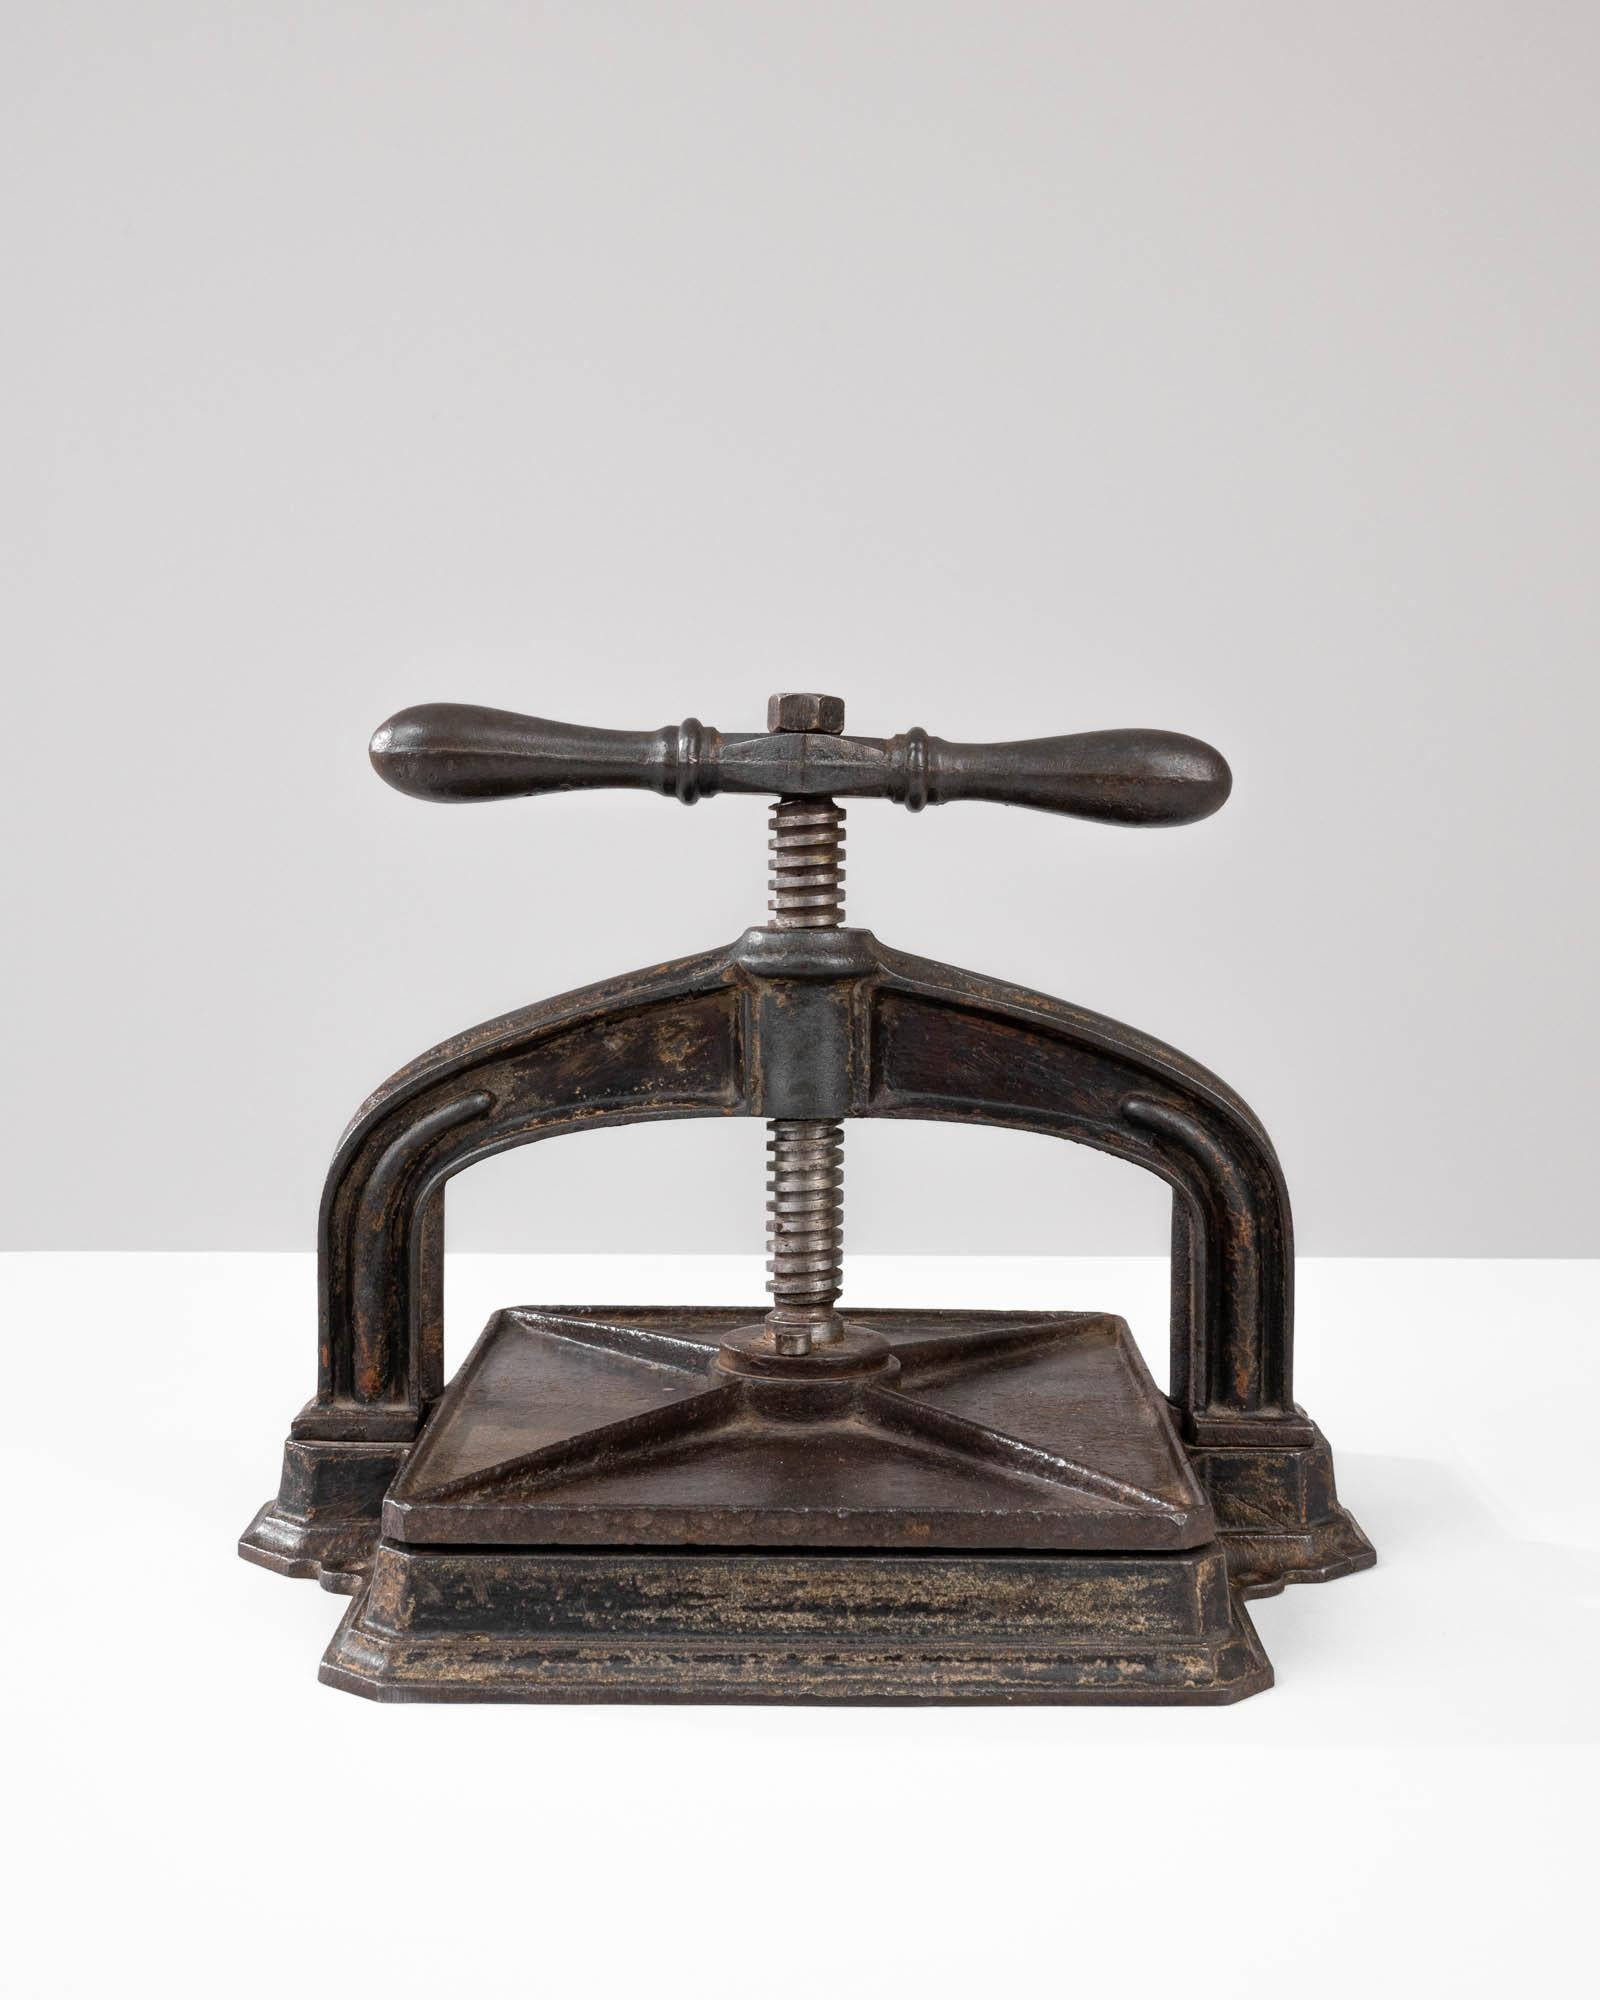 A cast iron press from 20th Century Belgium. Originally purposed as a book-binding press used in such places as banks or libraries, this unique antiquity suggests a niche function, while providing a universal visual appeal. Its cast iron form,